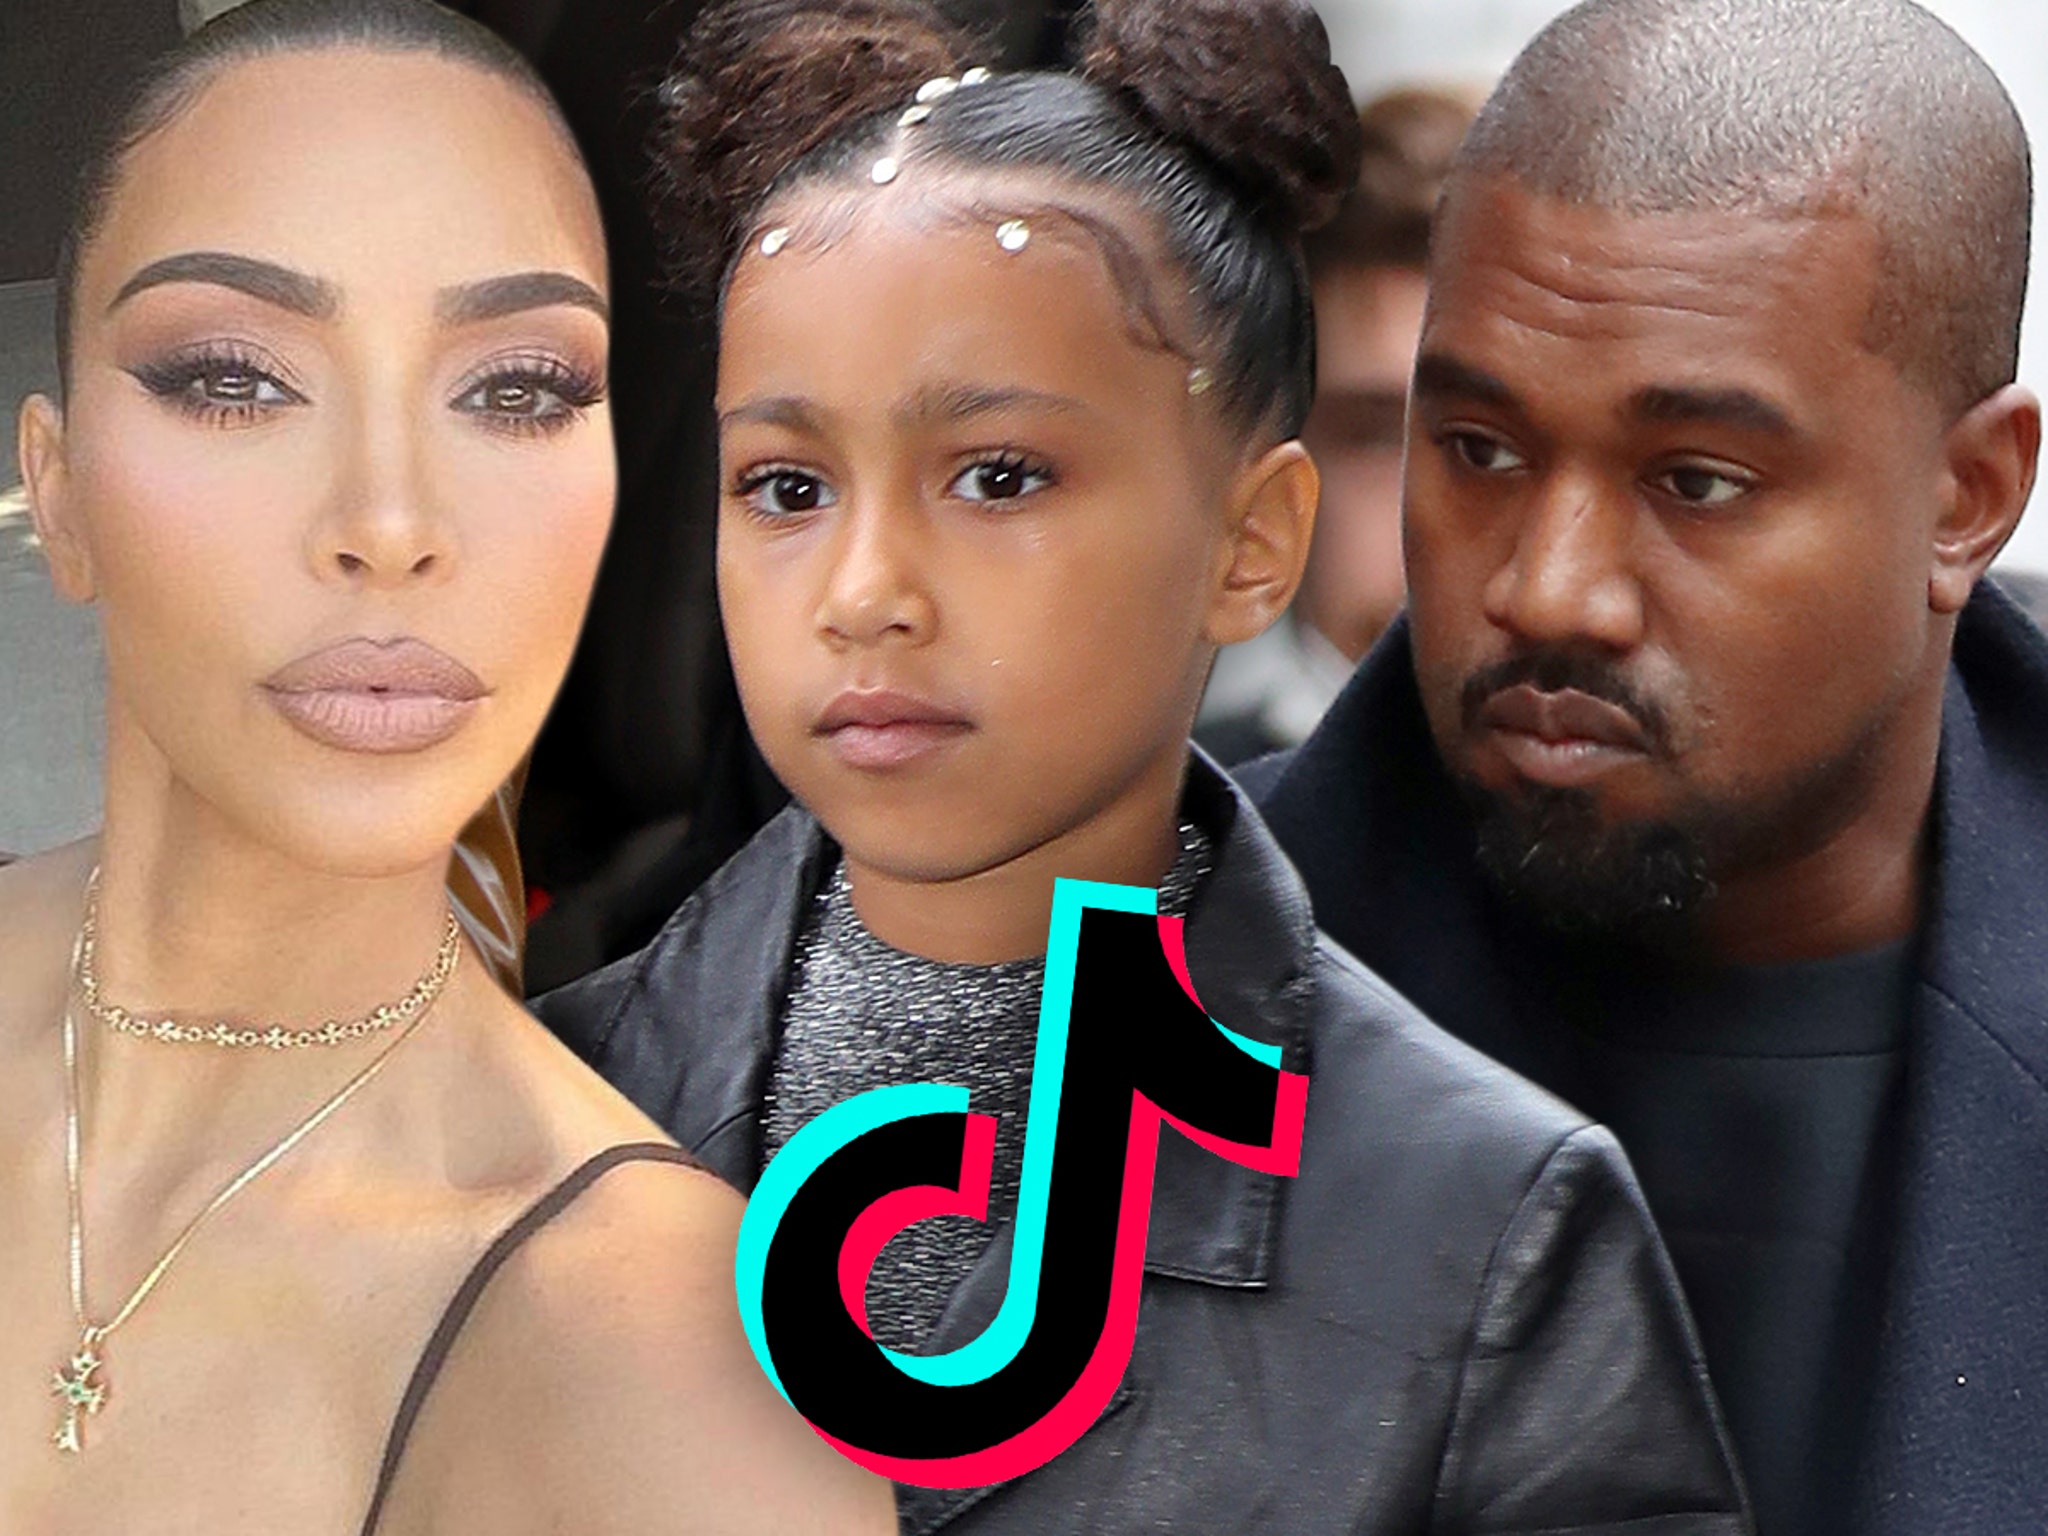 North Doesn't Have TikTok on Her Phone, Account Run by & Shared with Kim